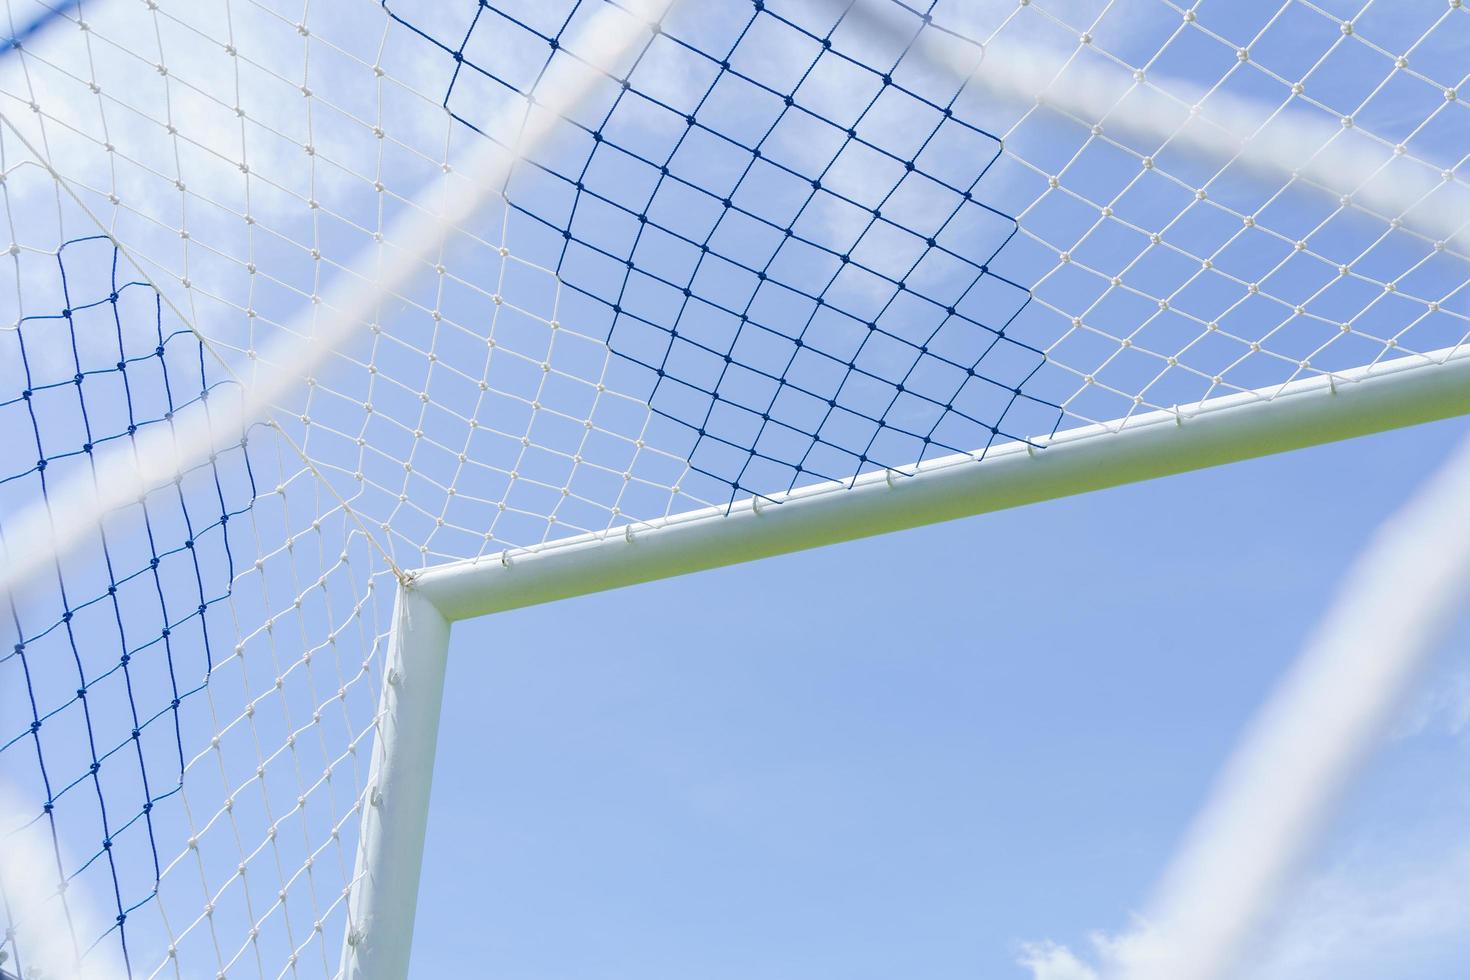 Behind the ropes of the outdoor soccer field goal net, the football goal background photo